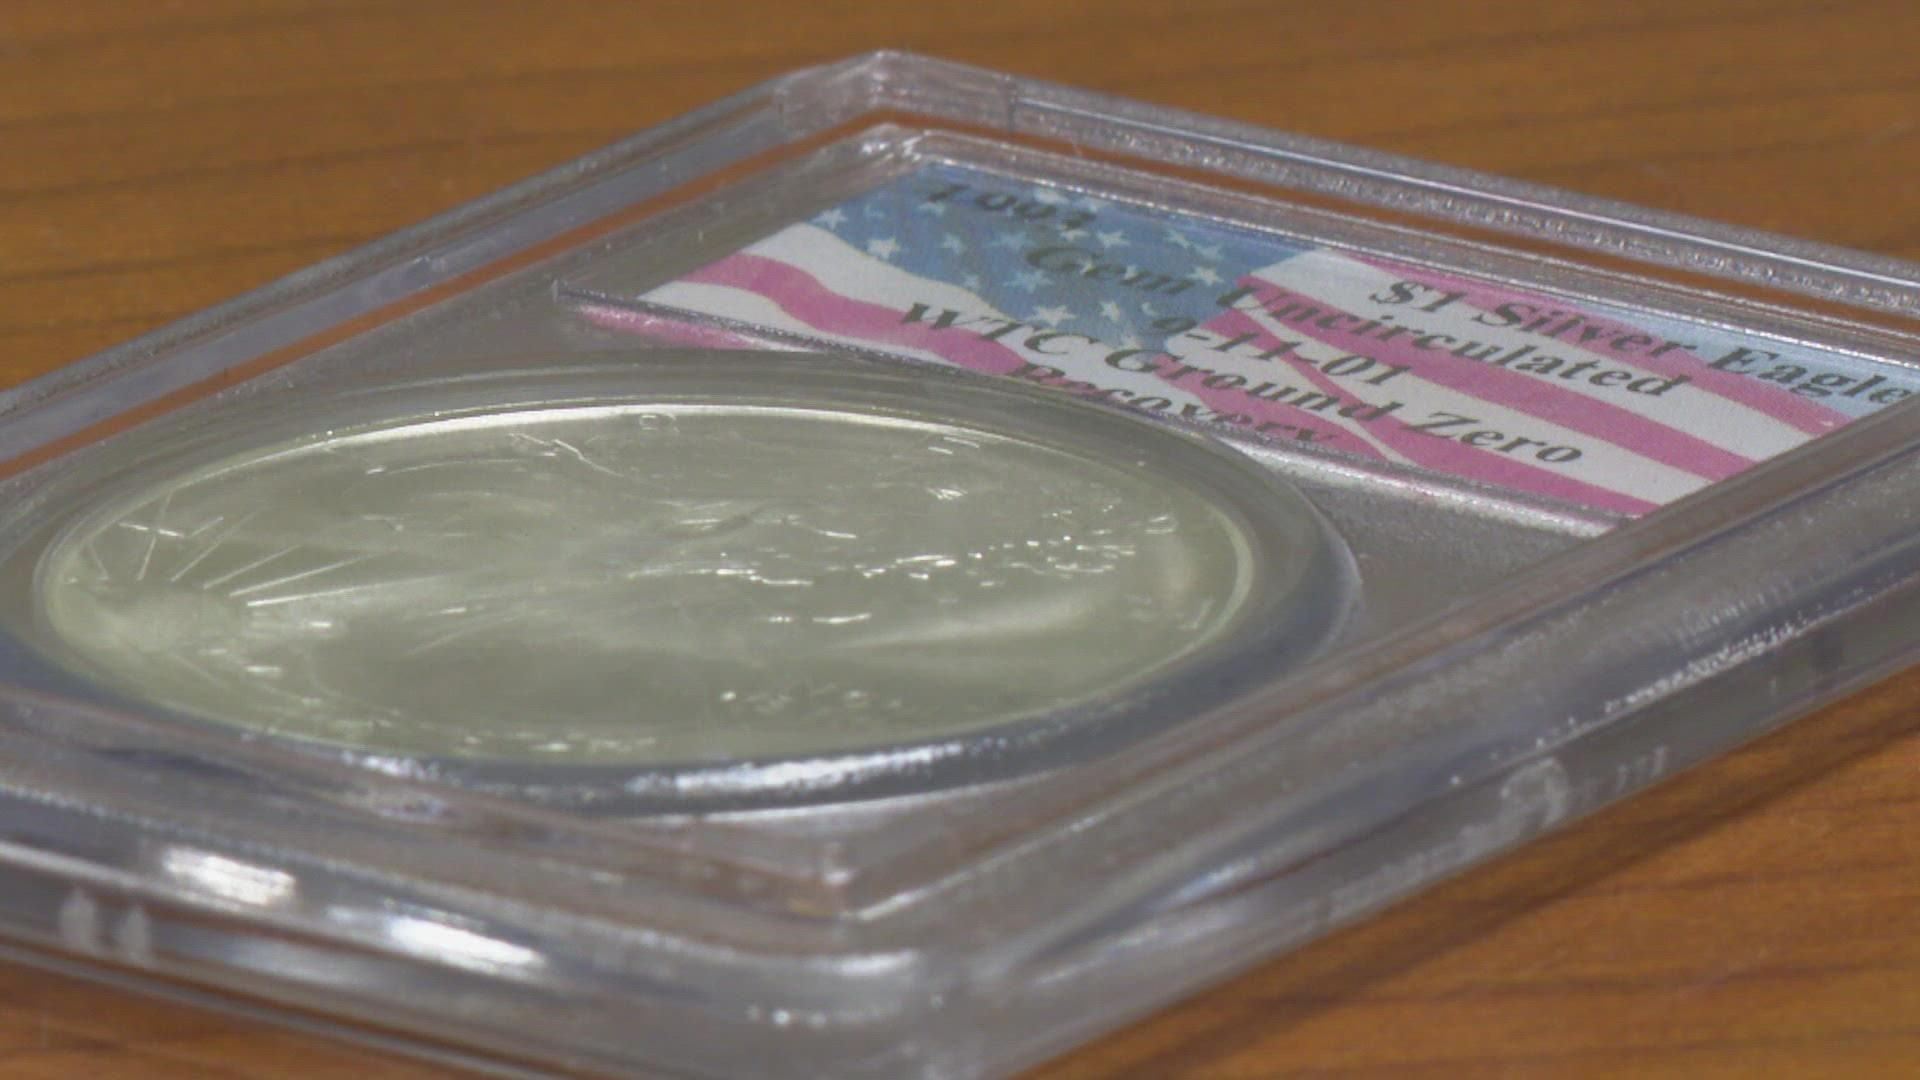 The coins were recovered at ground zero in New York City during the lengthy excavation process after the attacks.